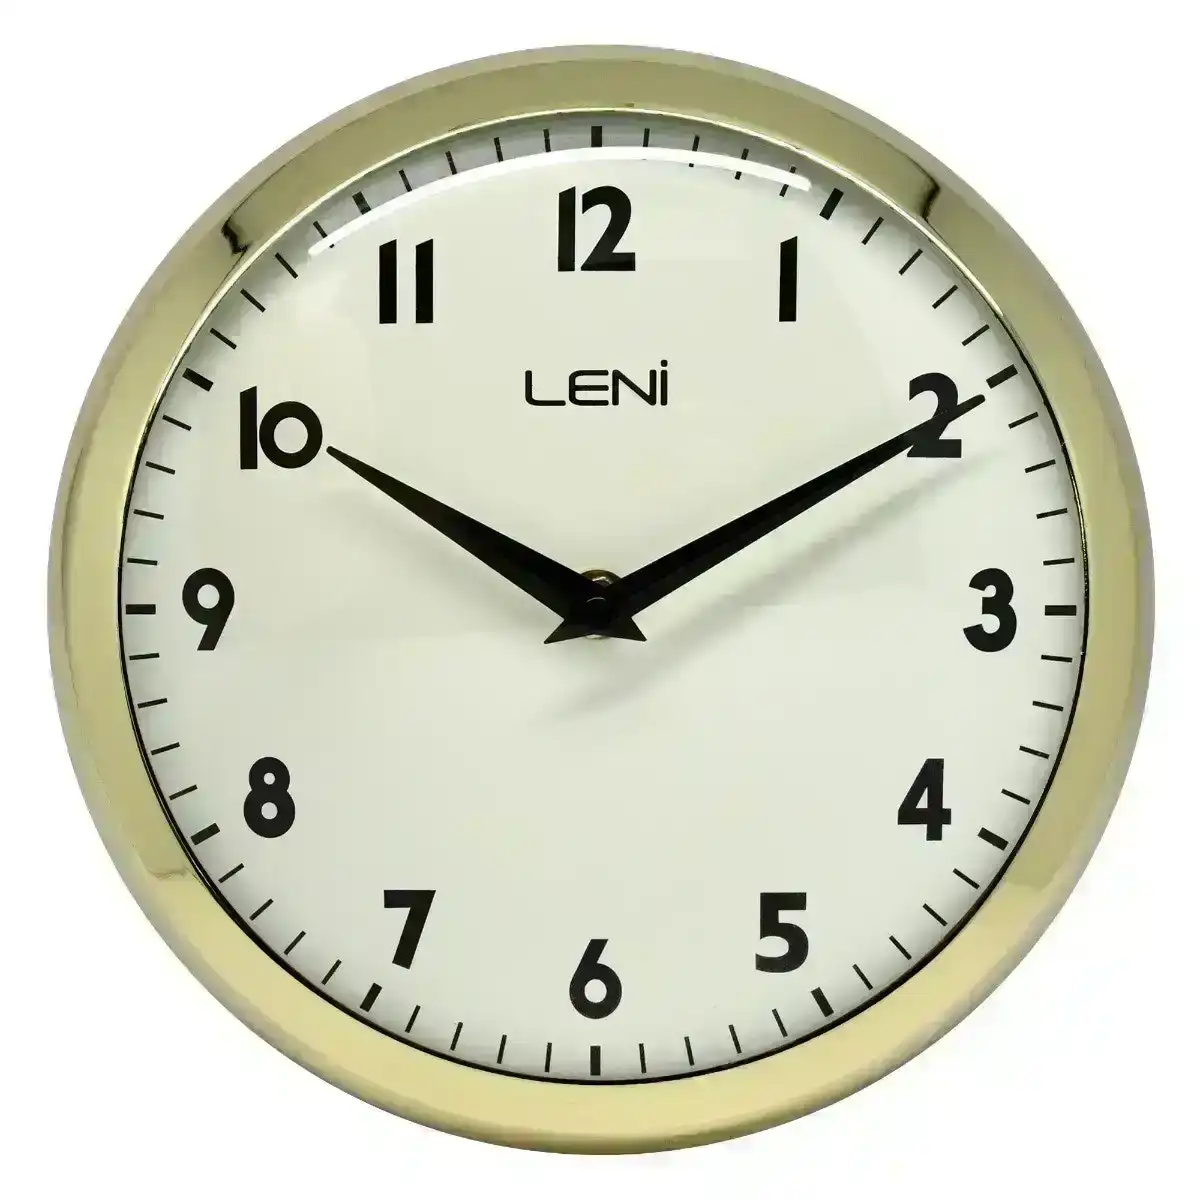 Leni 23cm Metal Round Silent Battery Operated School Analogue Wall Clock Gold